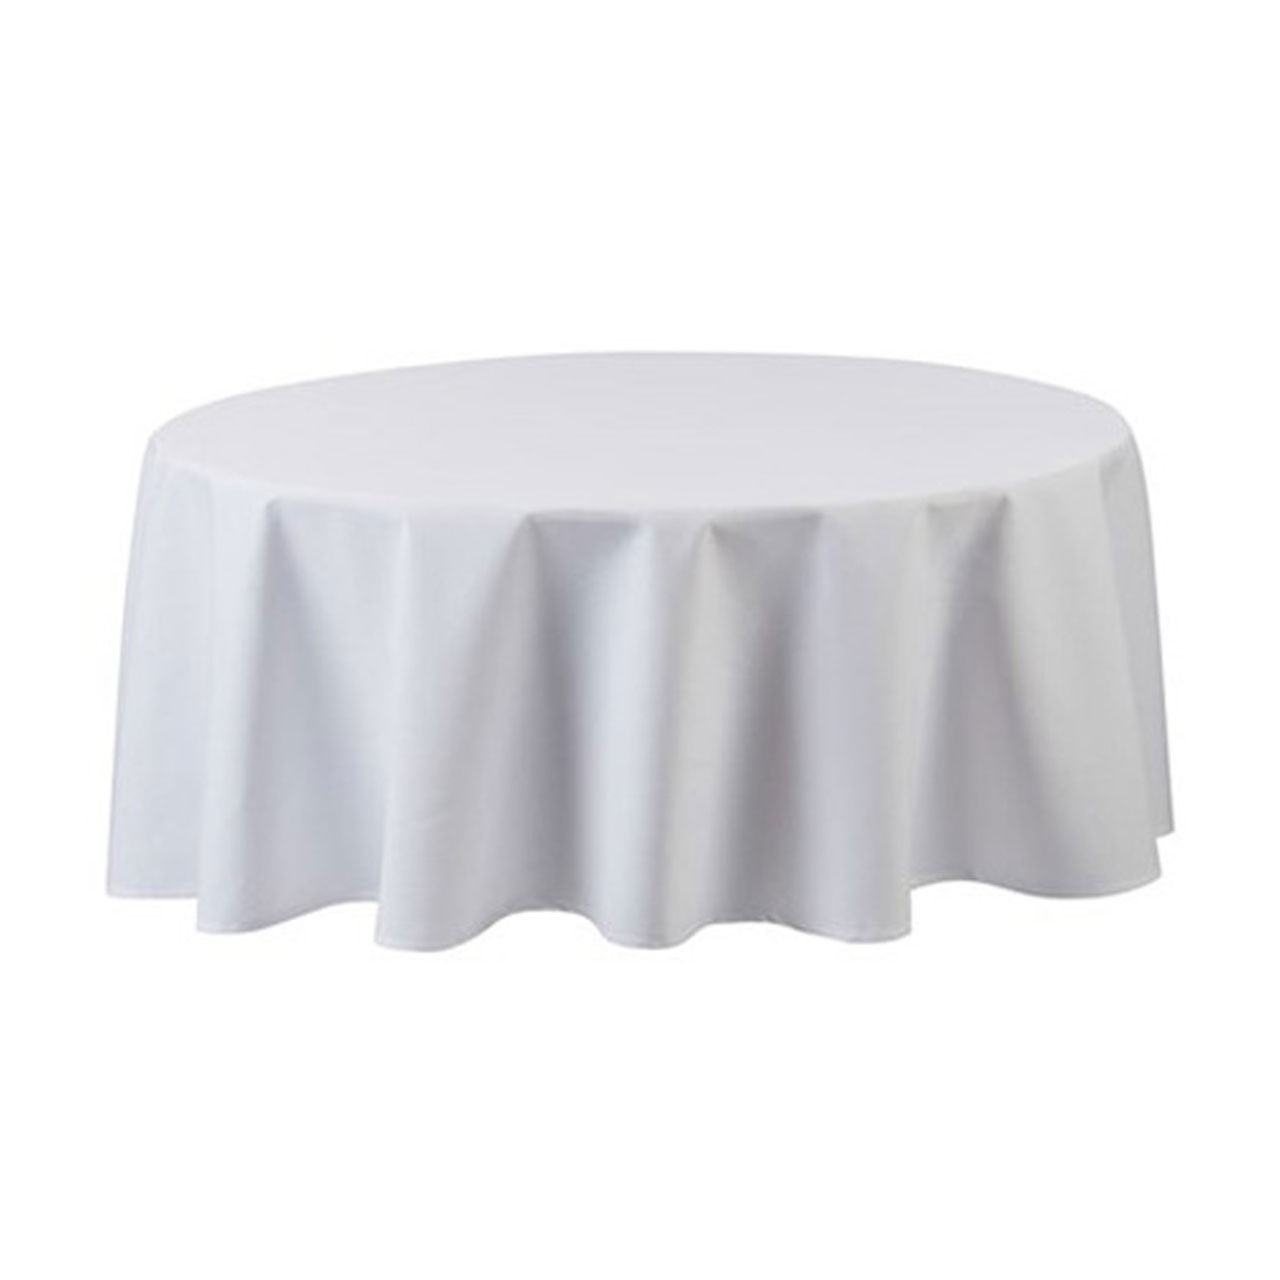 What is the ideal use for the Seamless White 120 round tablecloth?